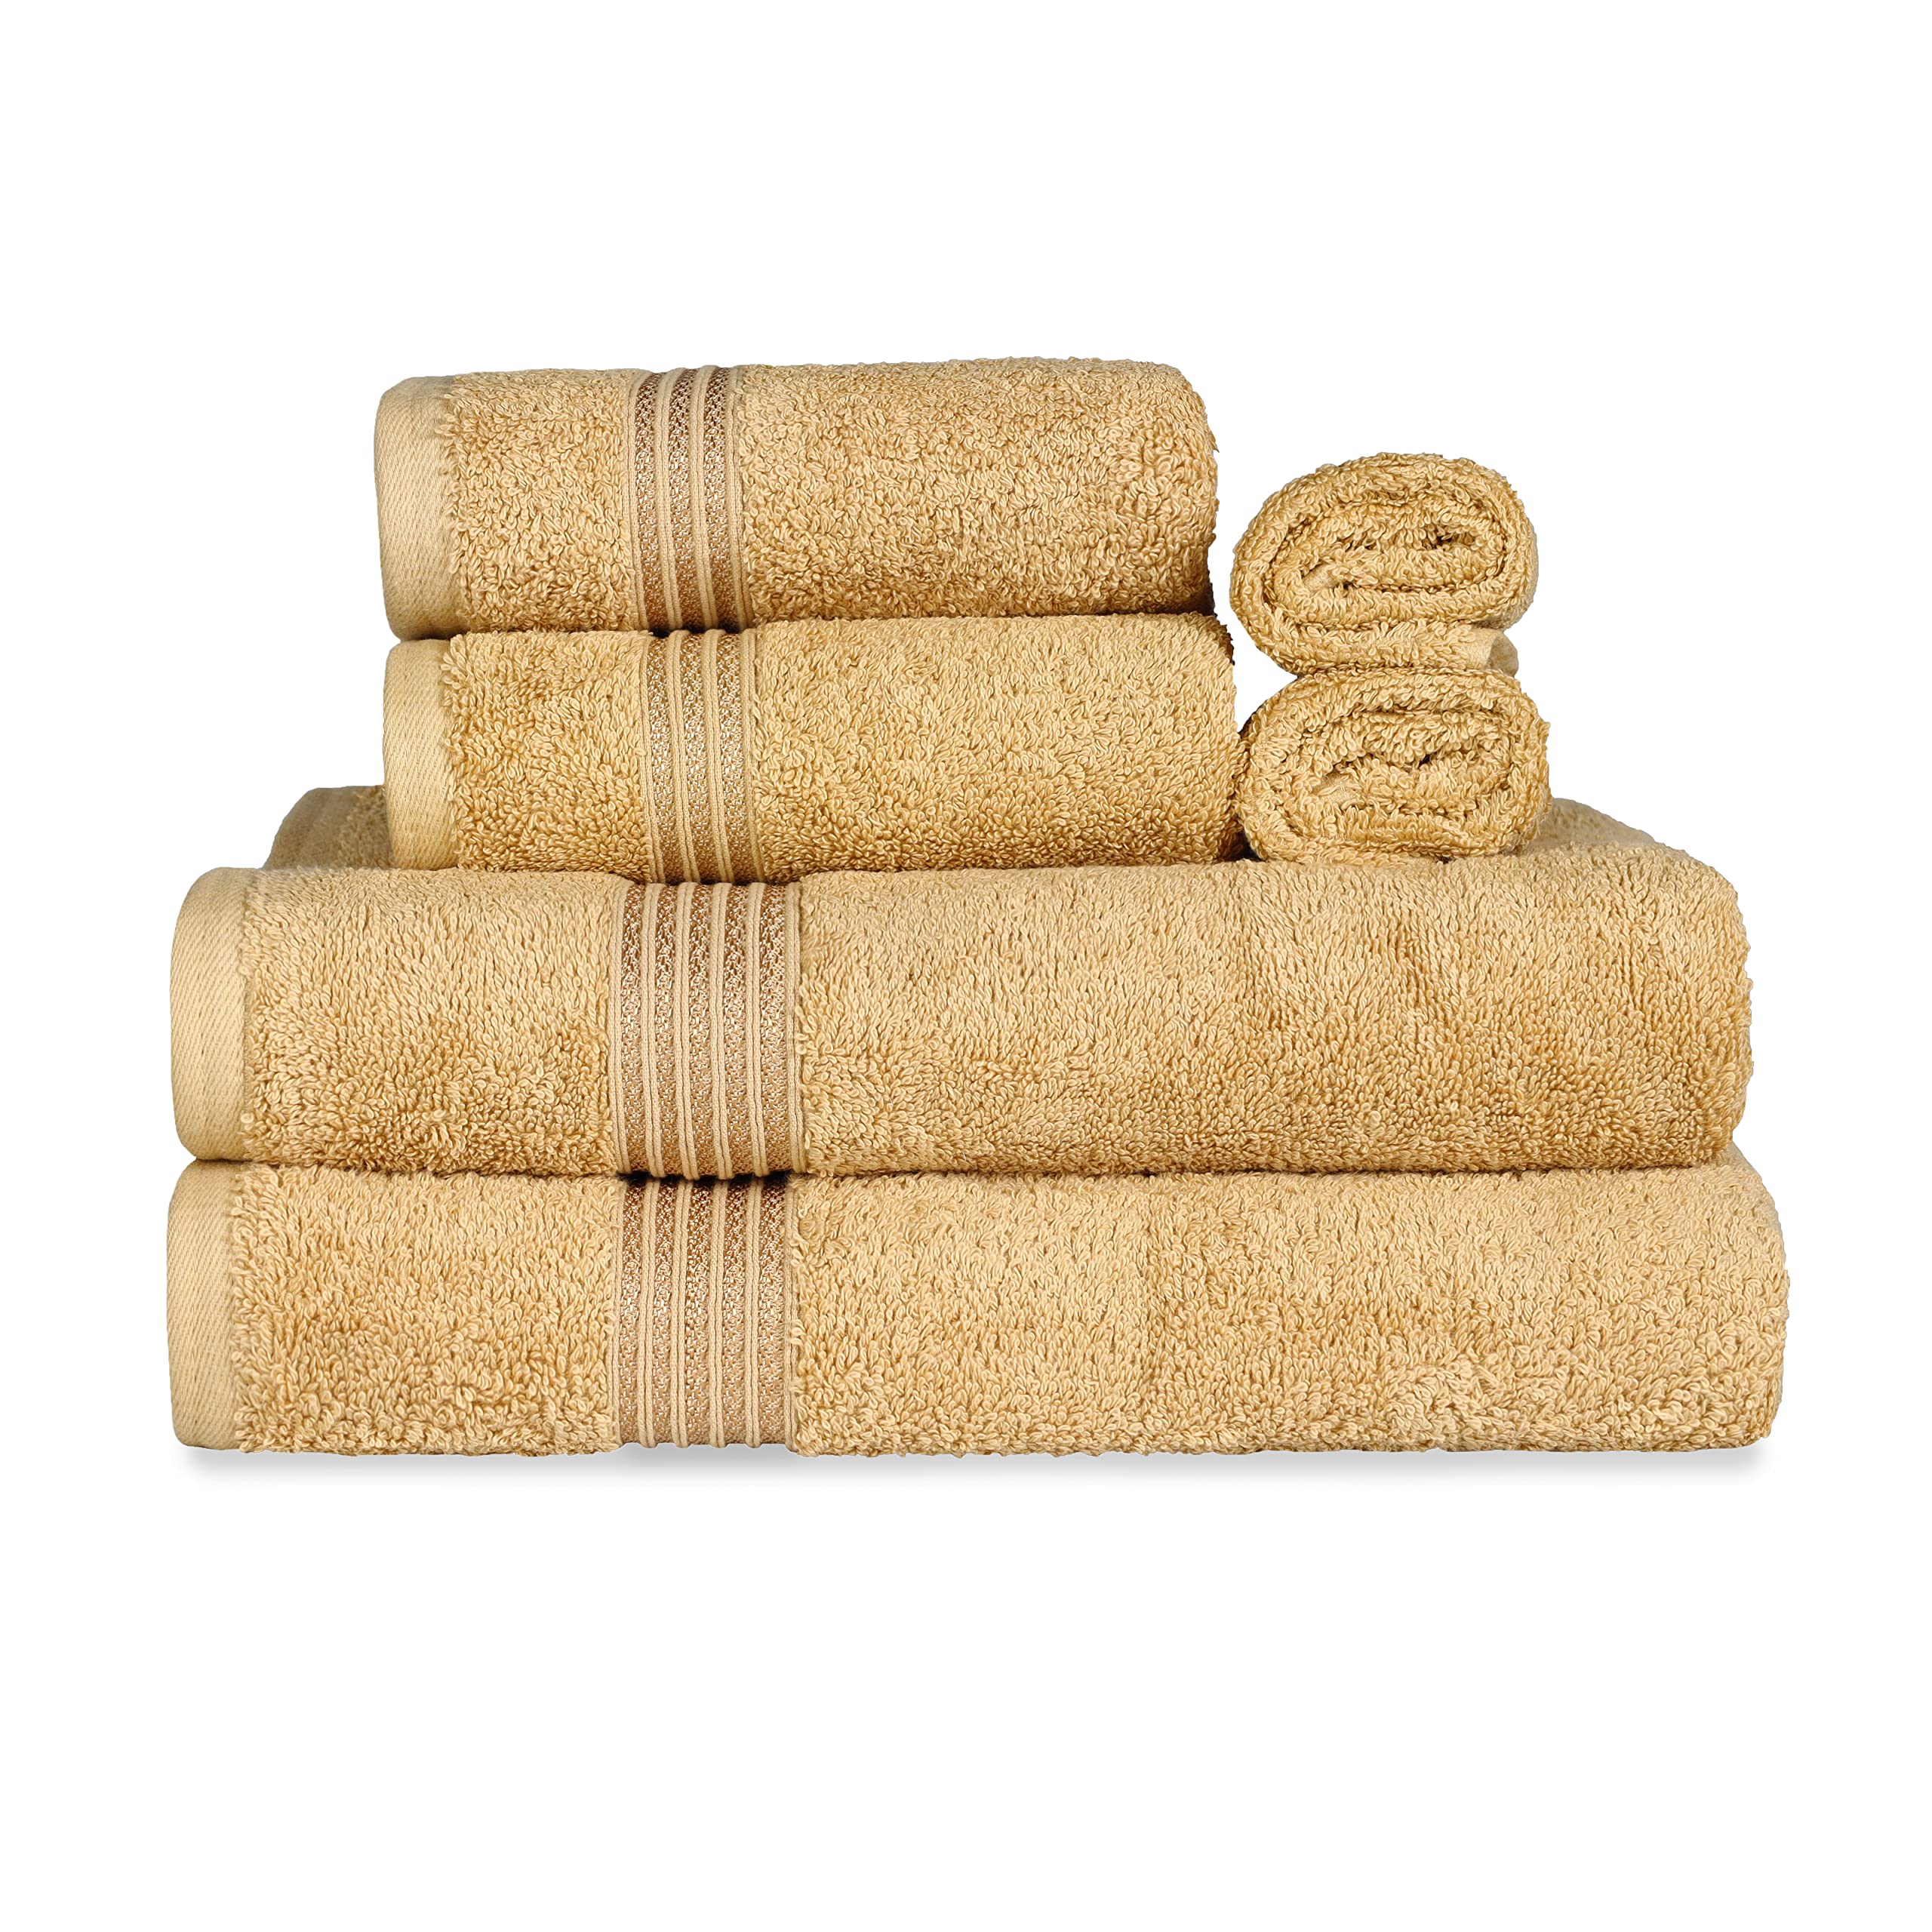 Luxury Egyptian Cotton Towel Combed Cotton Deep Pile Face Hand